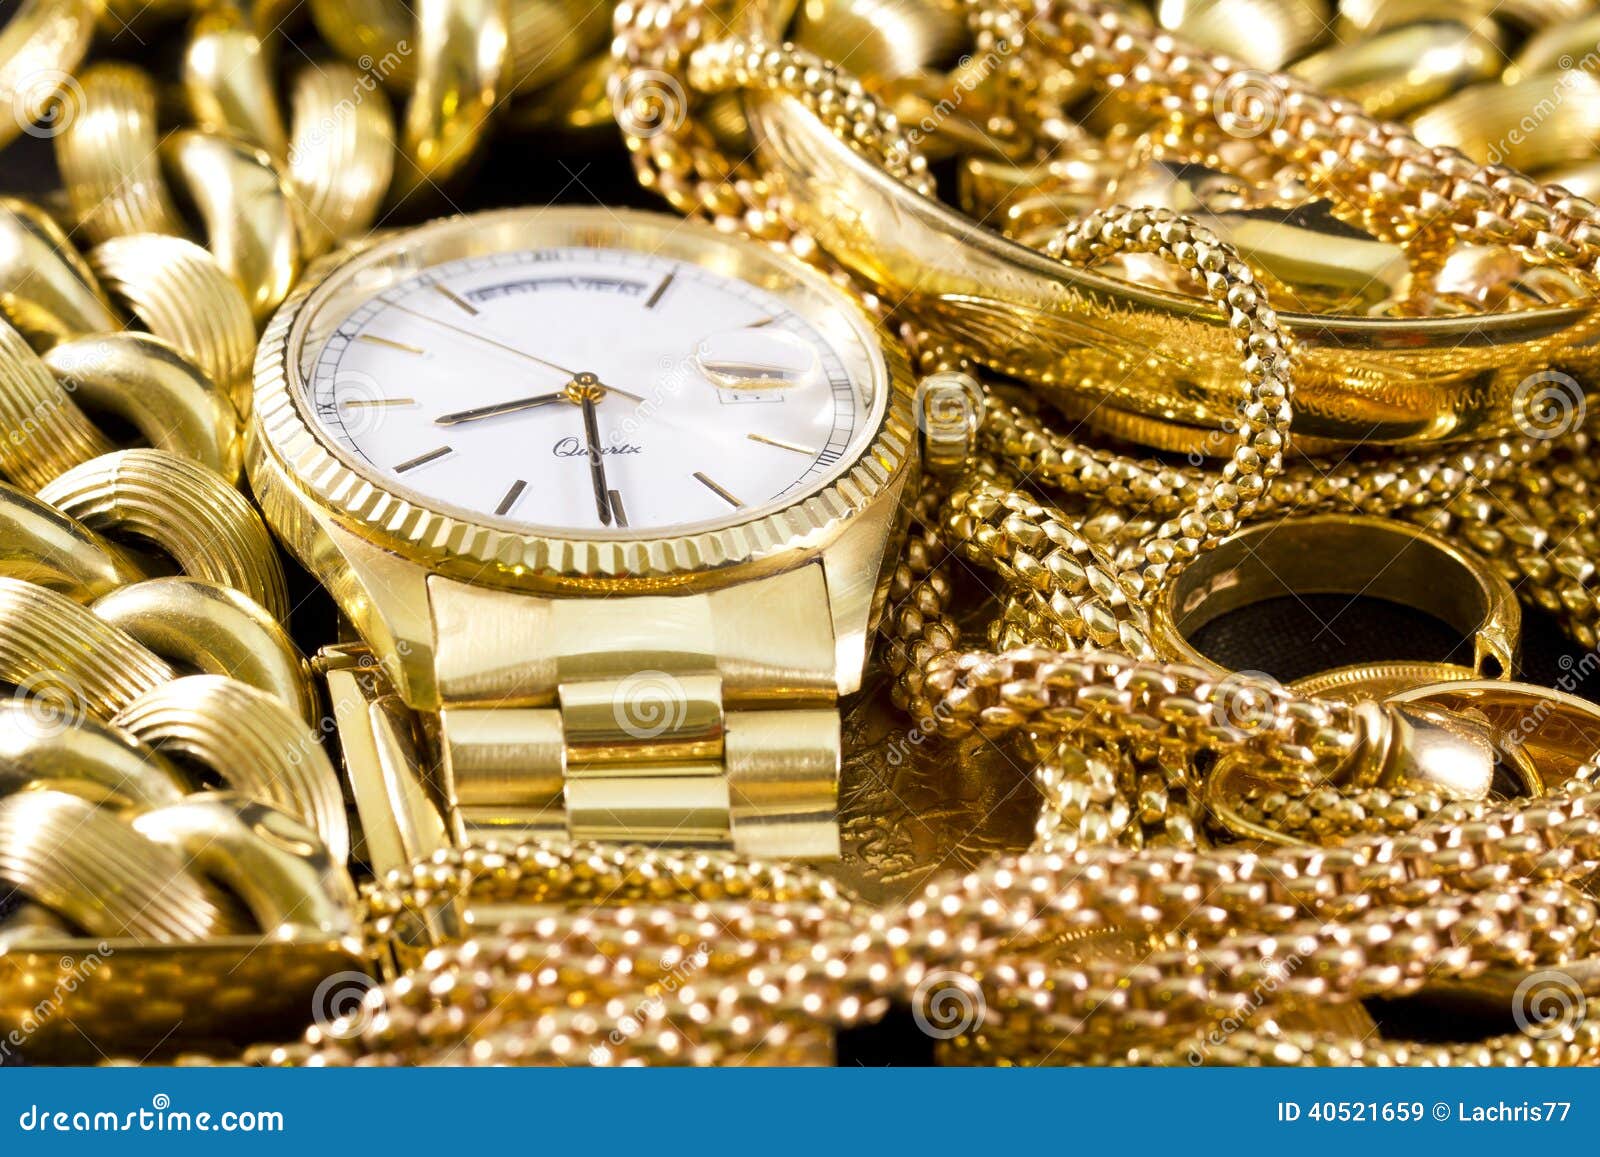 8,251 Gold Jewelry Watch Stock Photos - Free & Royalty-Free Stock